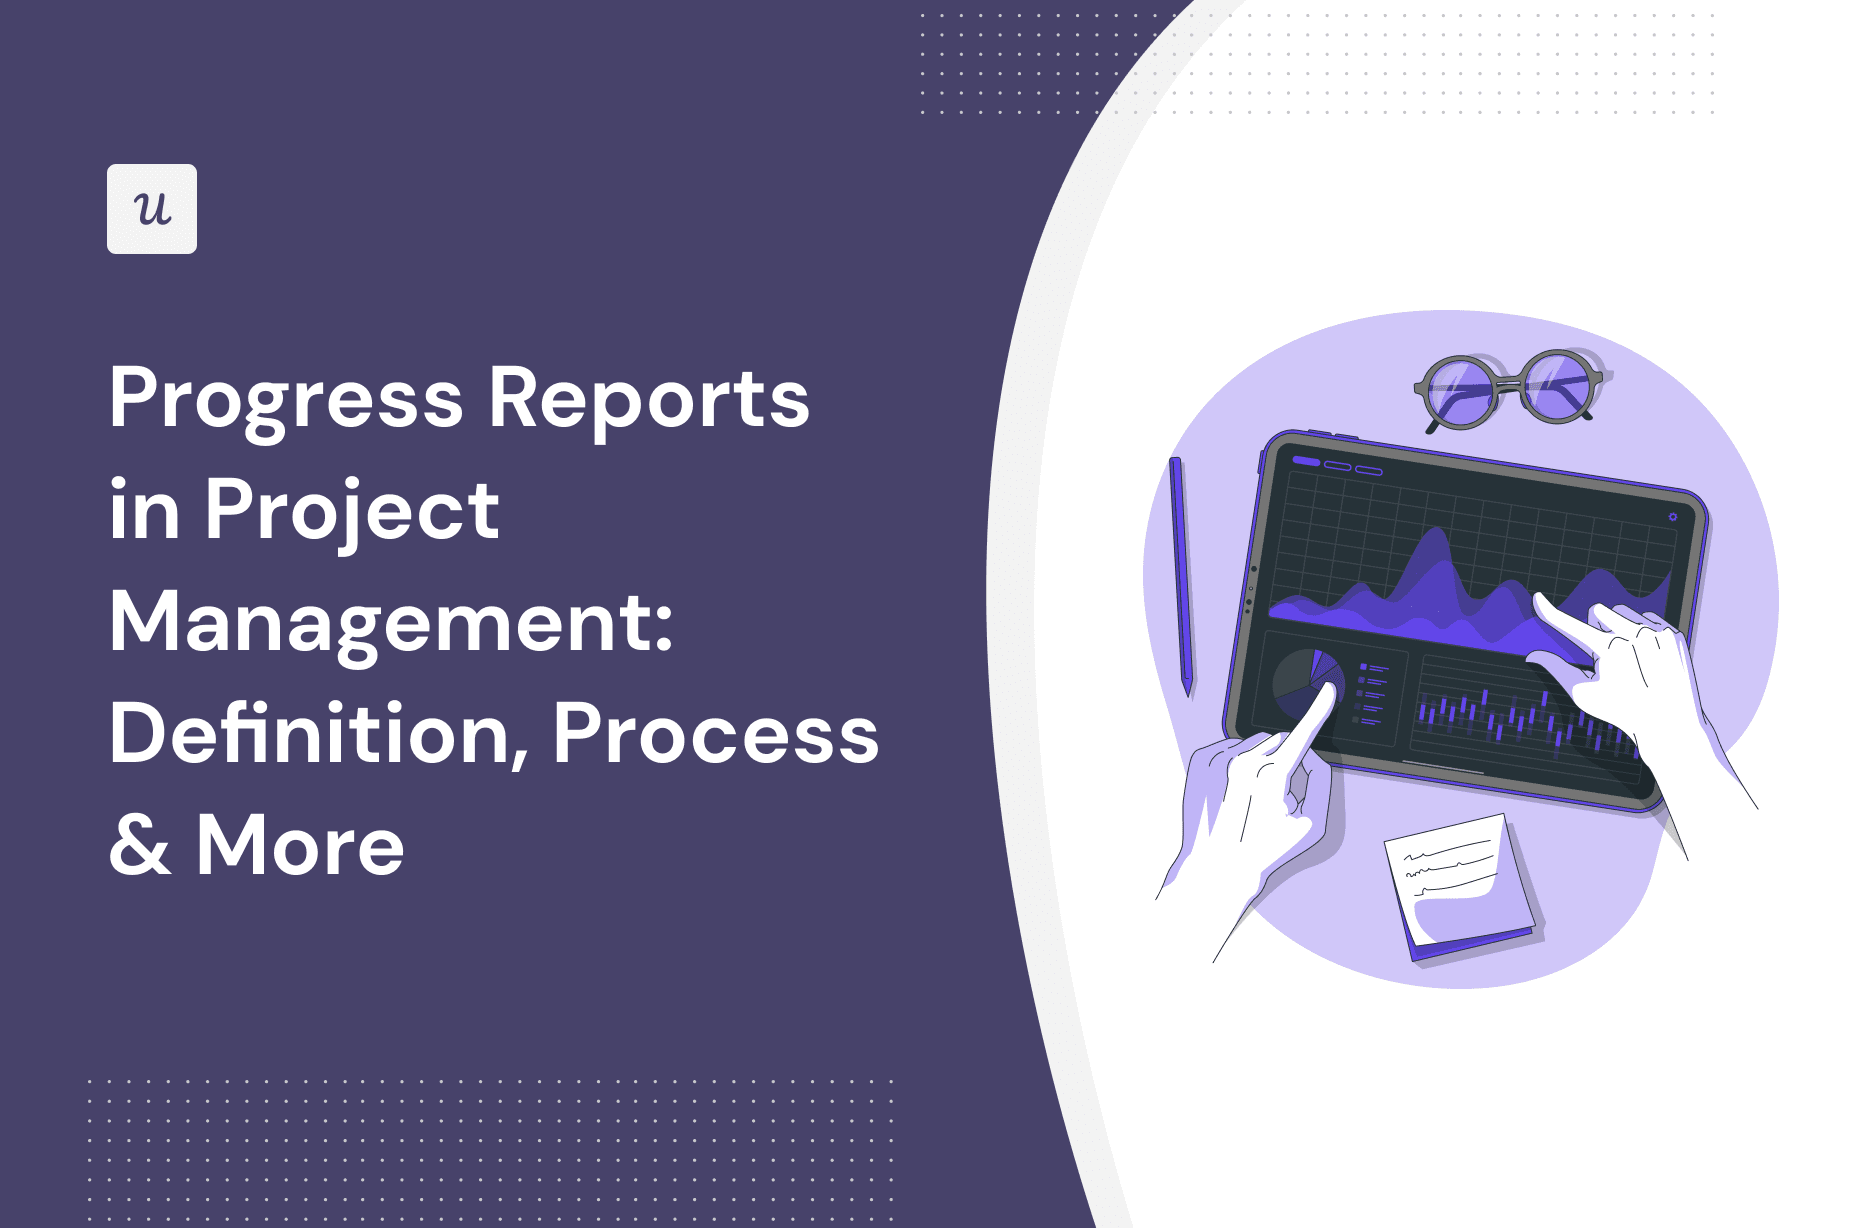 Progress Reports in Project Management: Definition, Process & More cover